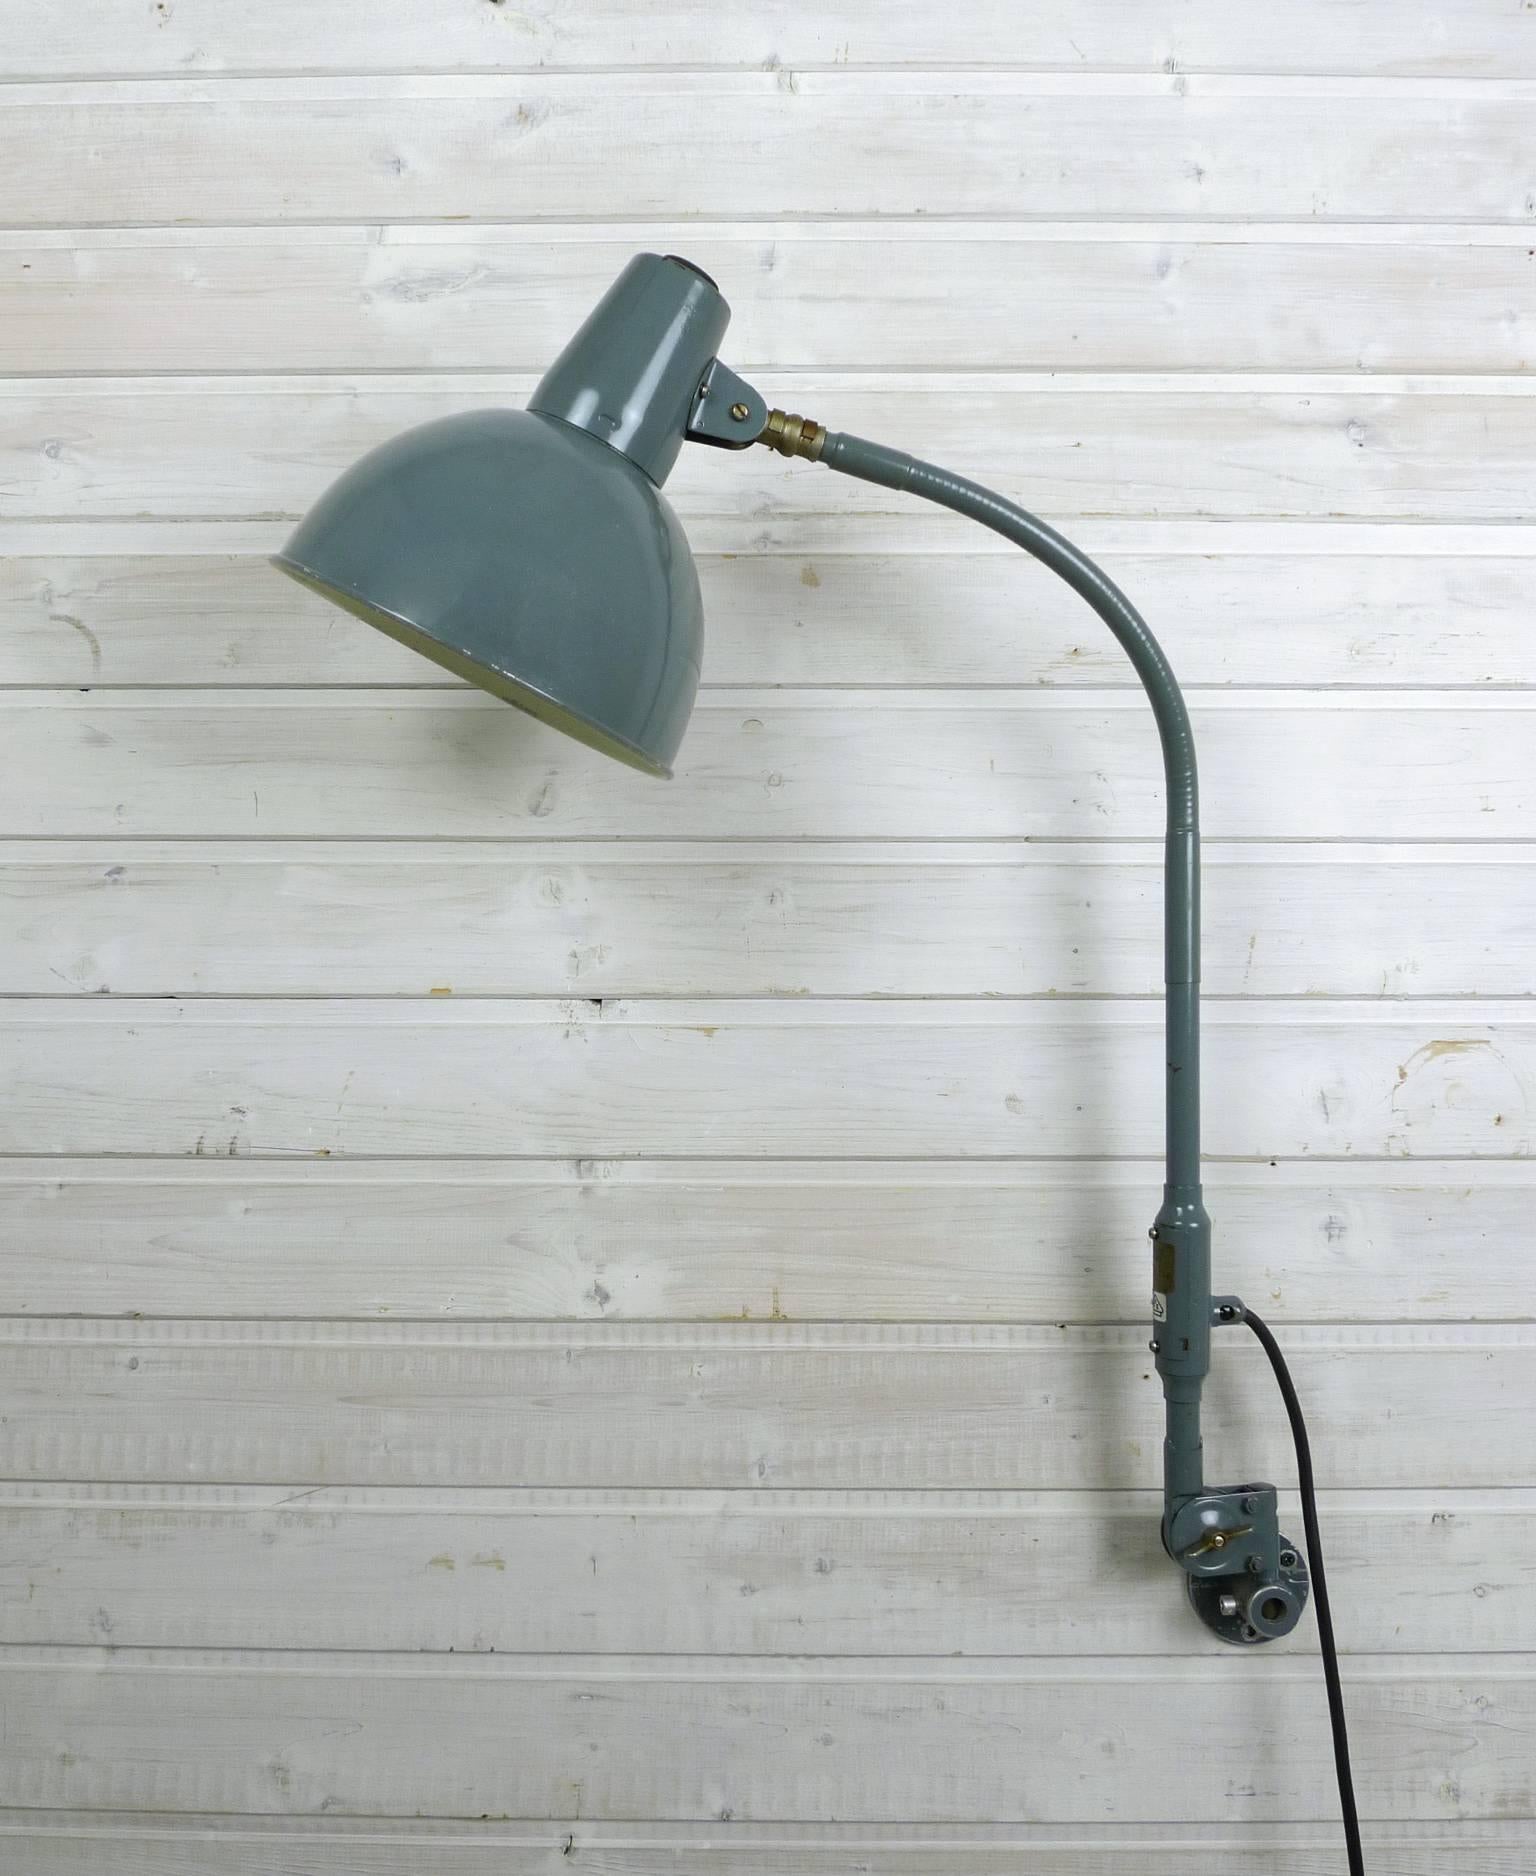 A gray painted workshop or working light for wall mounting from the 1950s by the manufacturer SIS from Dresden. Both the joint on the wall attachment and the swan neck as well as the joint on the reflector allow numerous adjustment possibilities to